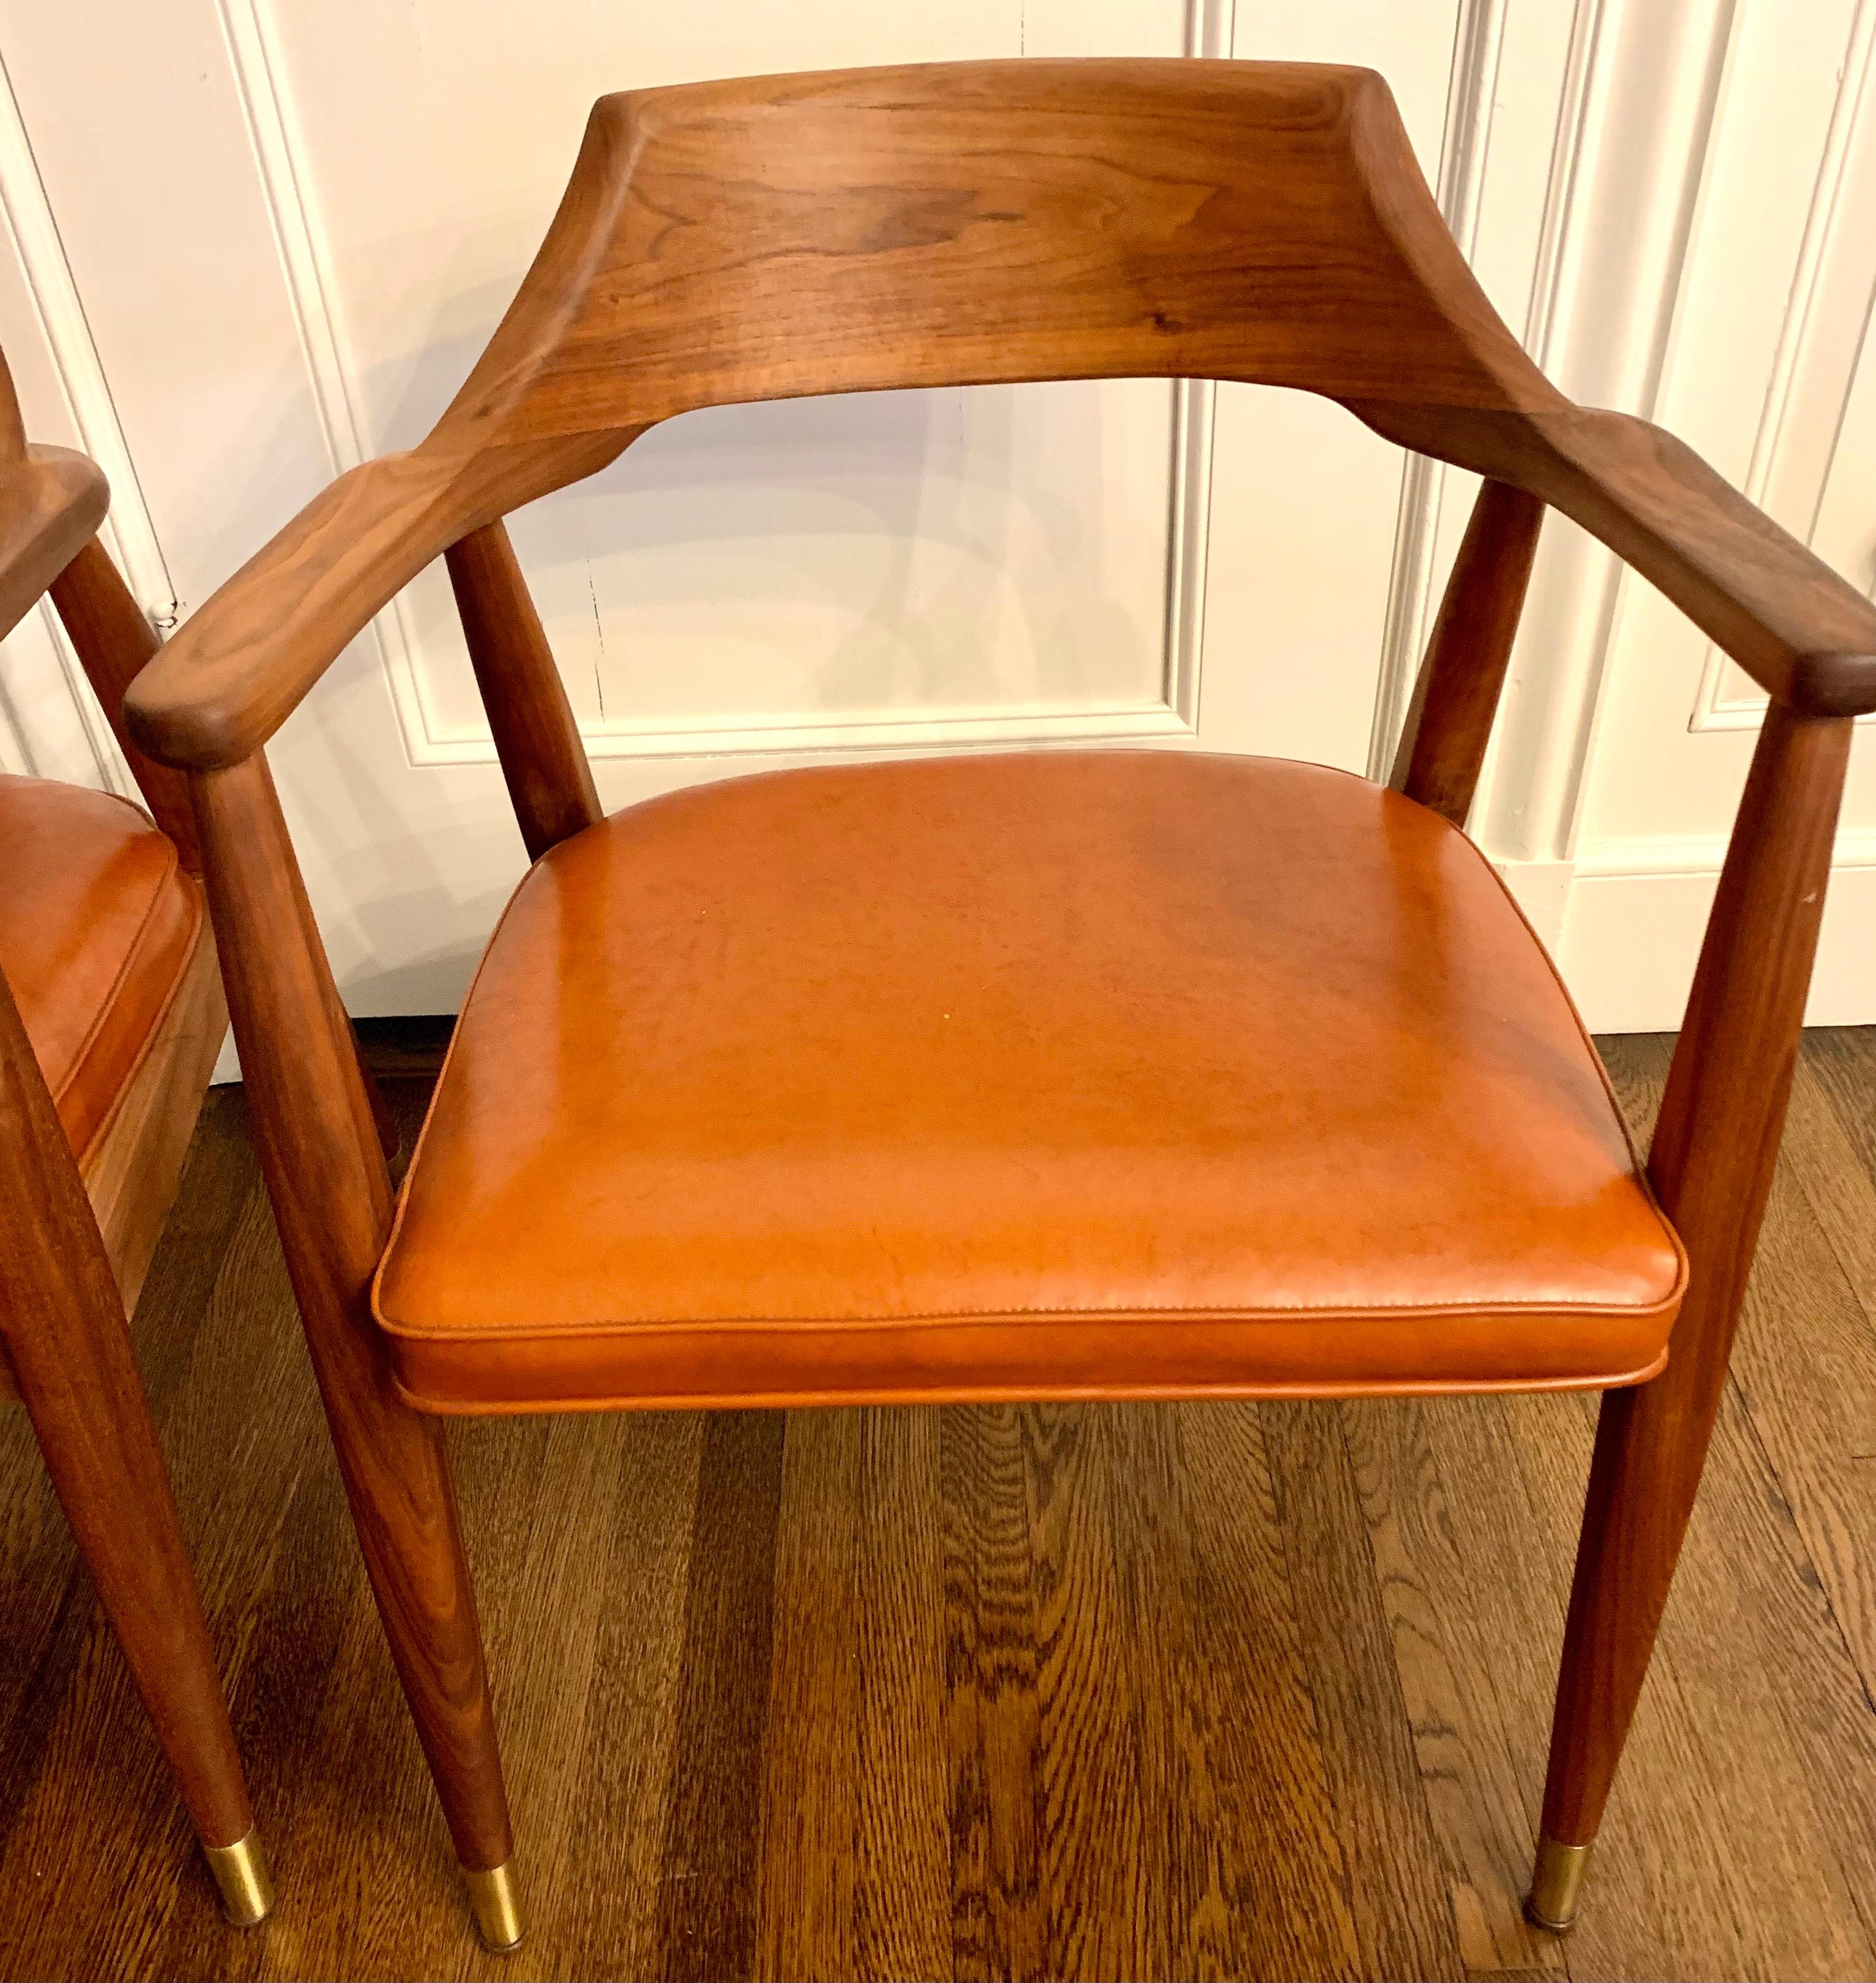 Pair of vintage mid century curved back arm chairs with solid walnut frame and original orange leather upholstery. Manufactured by the Jasper Chair Co., Jasper, Indiana - founded 1921. Scandinavian inspired design with curved back rests angled legs